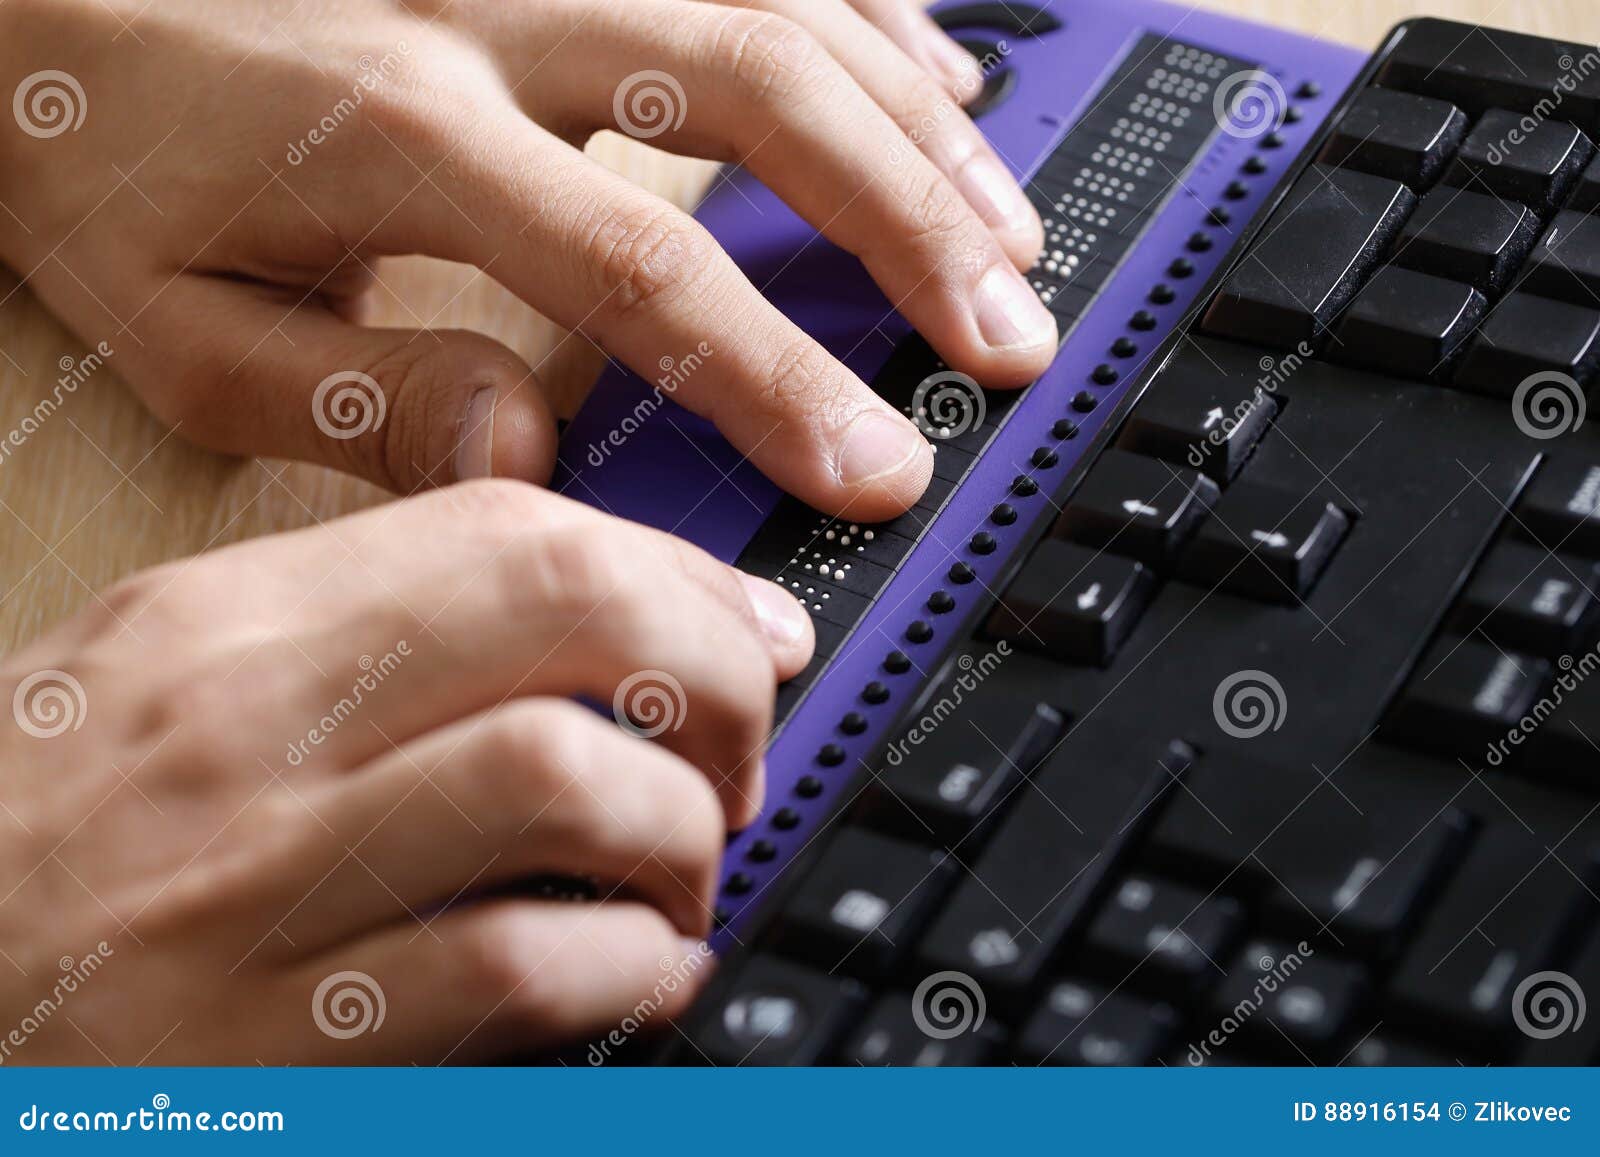 blind person using computer with braille computer display